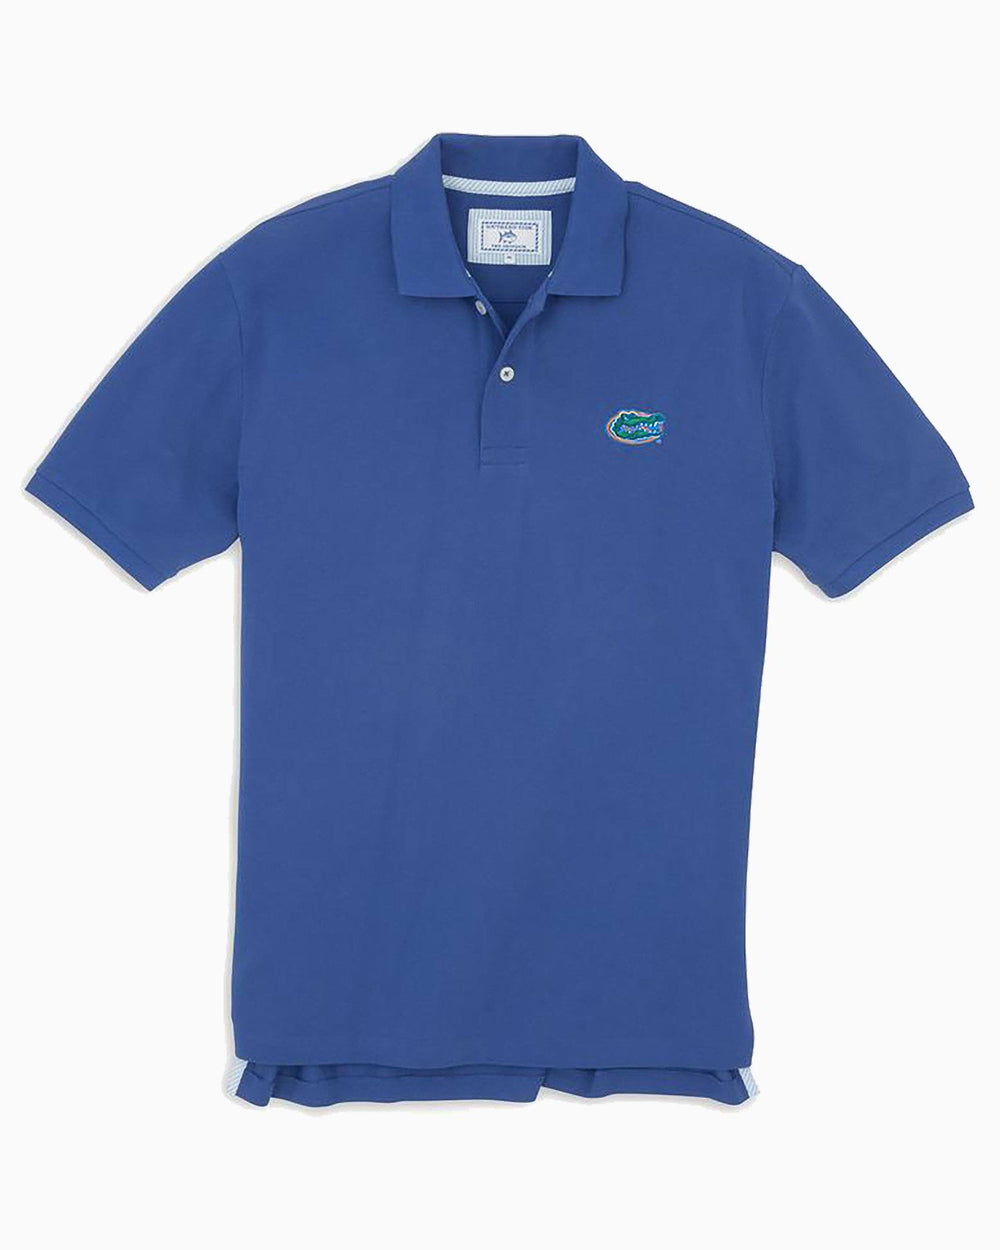 The front view of the Men's Light Blue Florida Gators Pique Polo Shirt by Southern Tide - University Blue